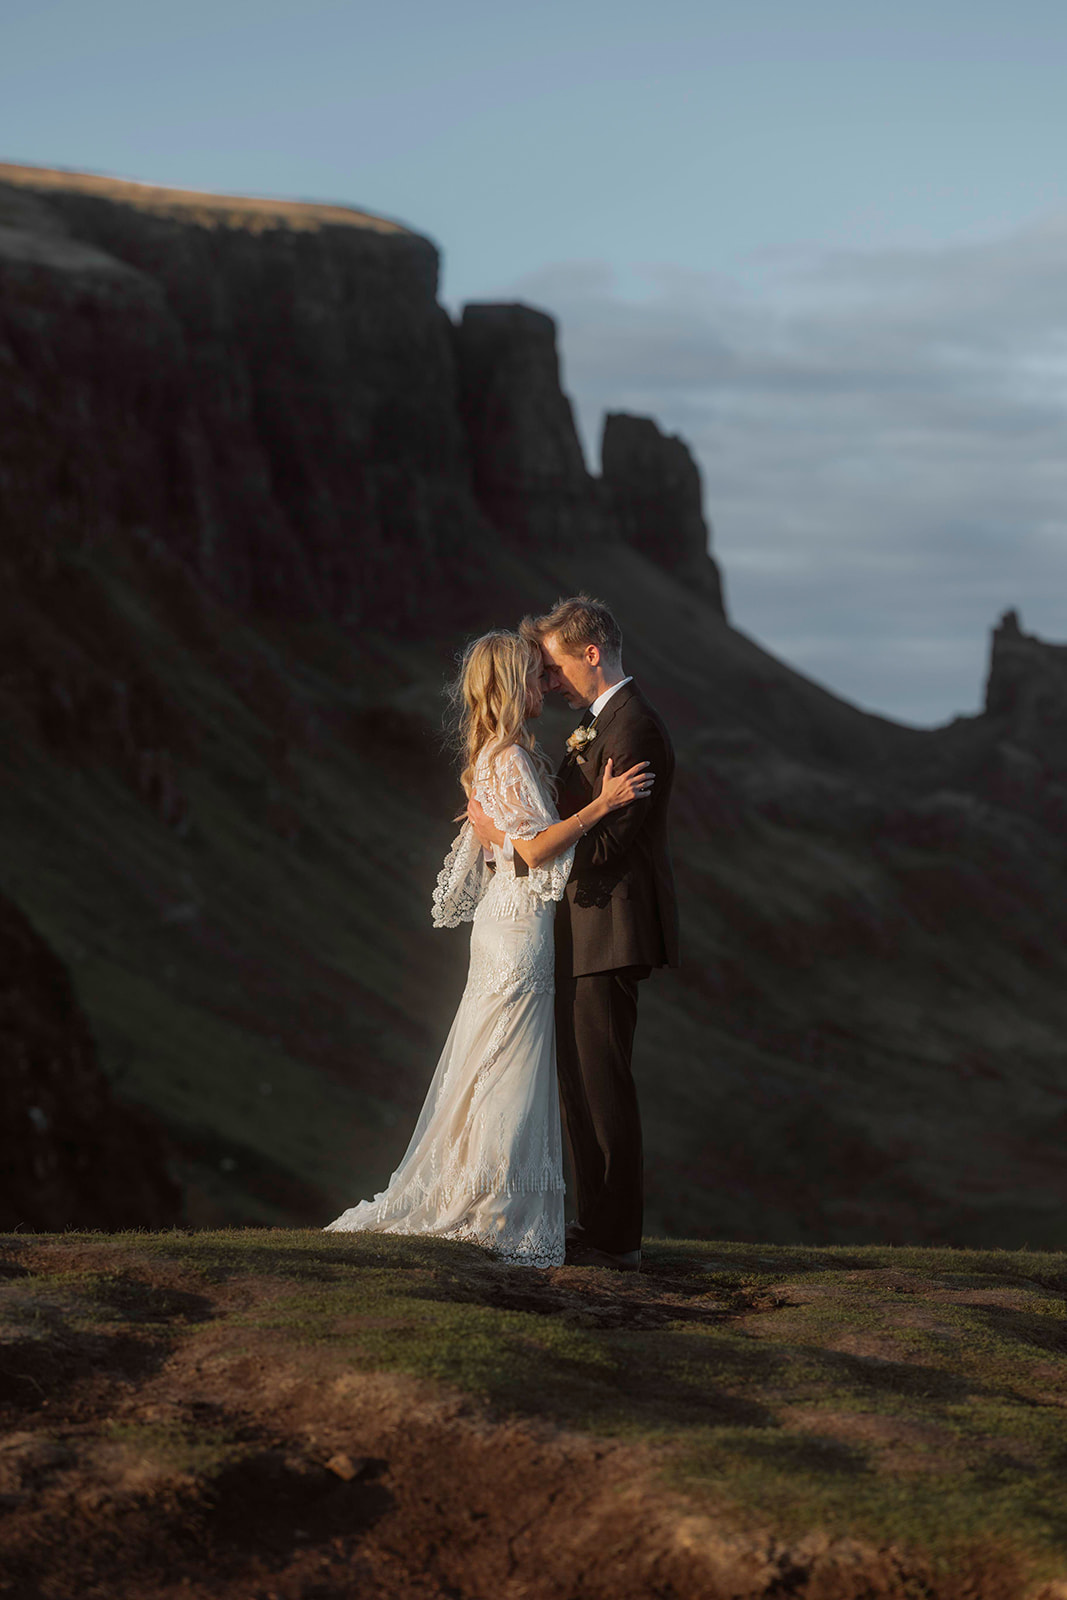 Kara and Andy shared a romantic moment after their Isle of Skye elopement ceremony